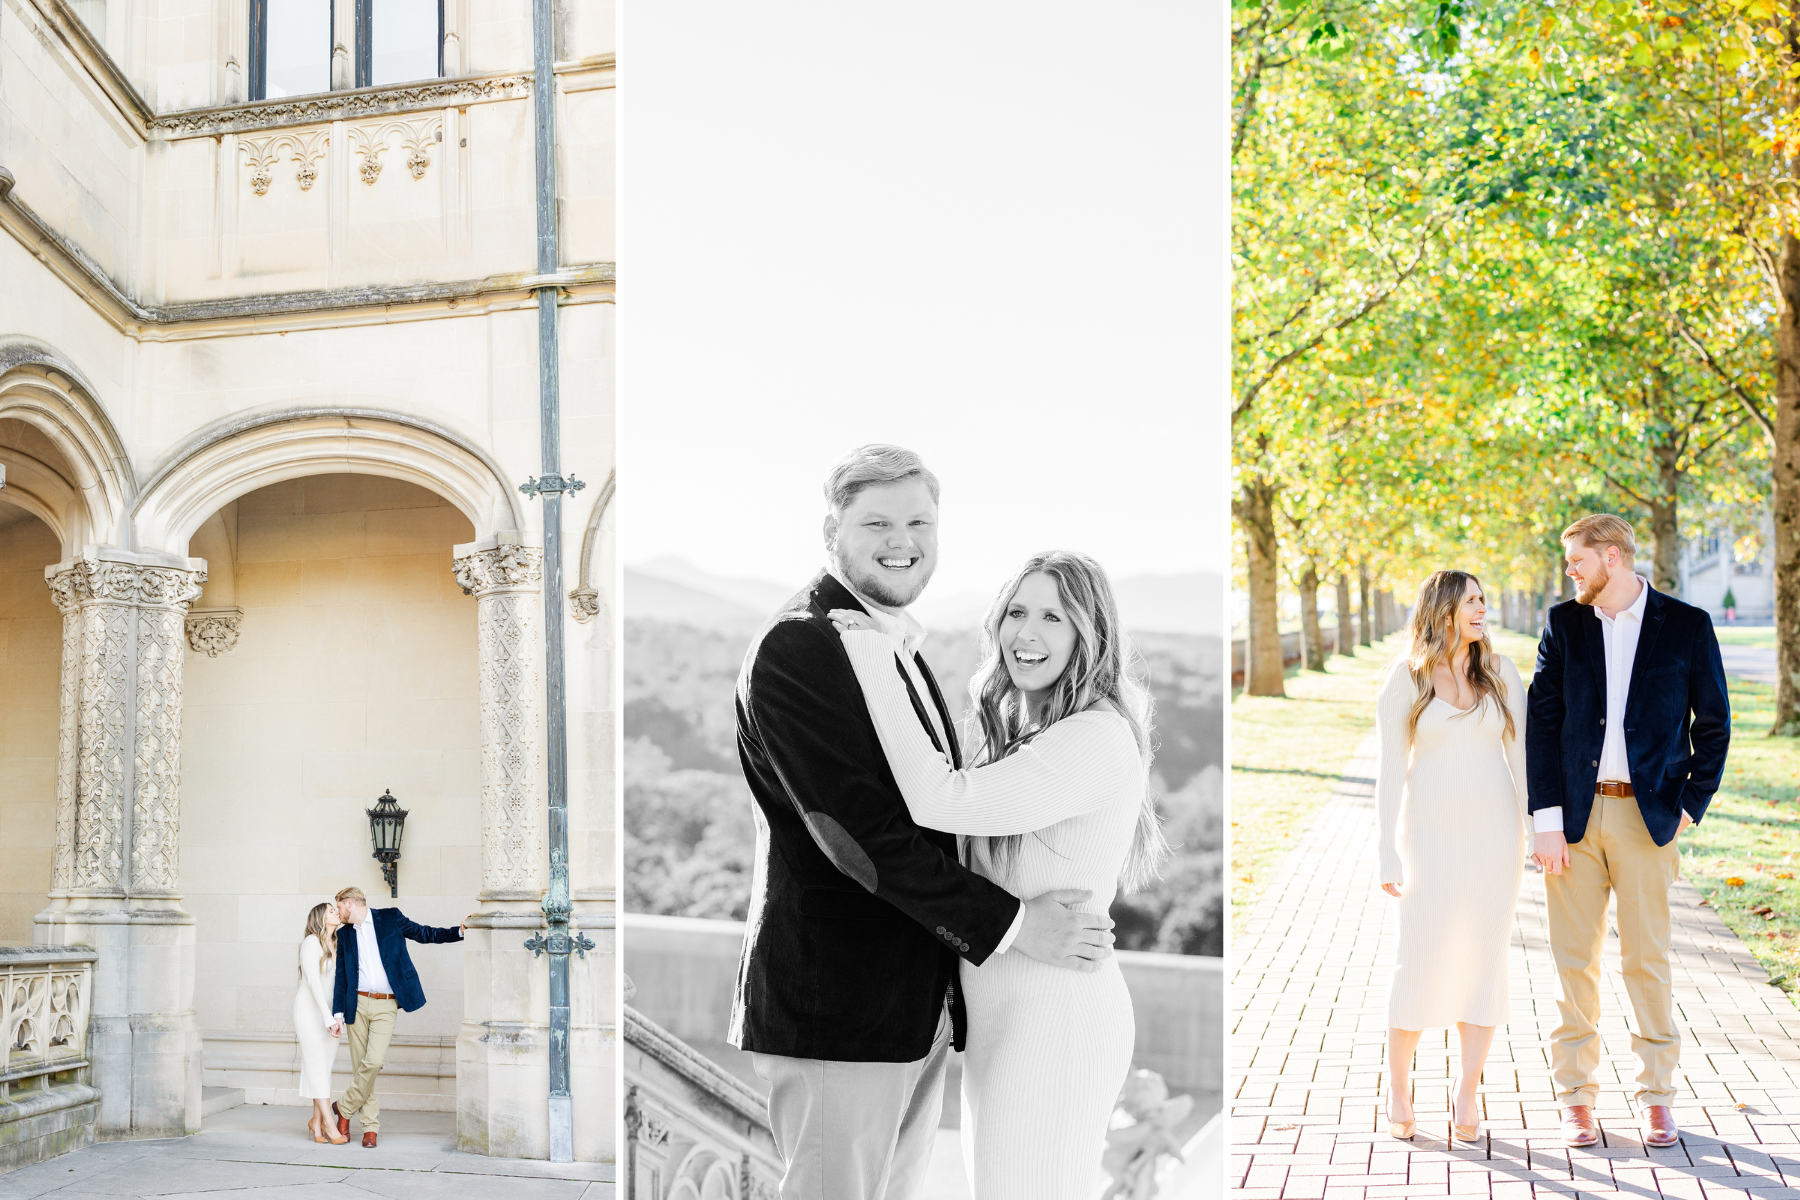 Fall Engagement Session at the Biltmore